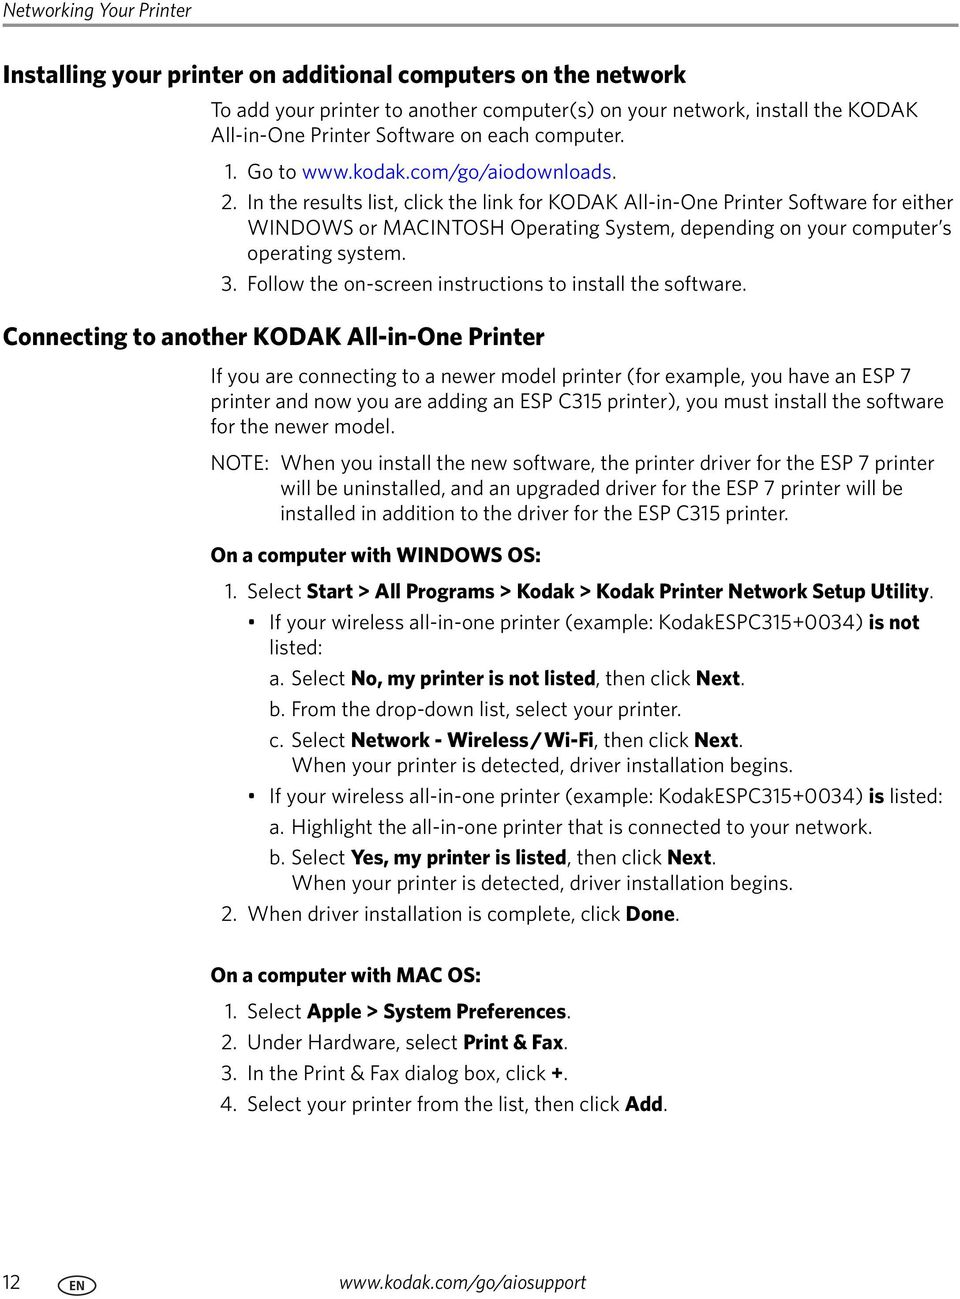 In the results list, click the link for KODAK All-in-One Printer Software for either WINDOWS or MACINTOSH Operating System, depending on your computer s operating system. 3.